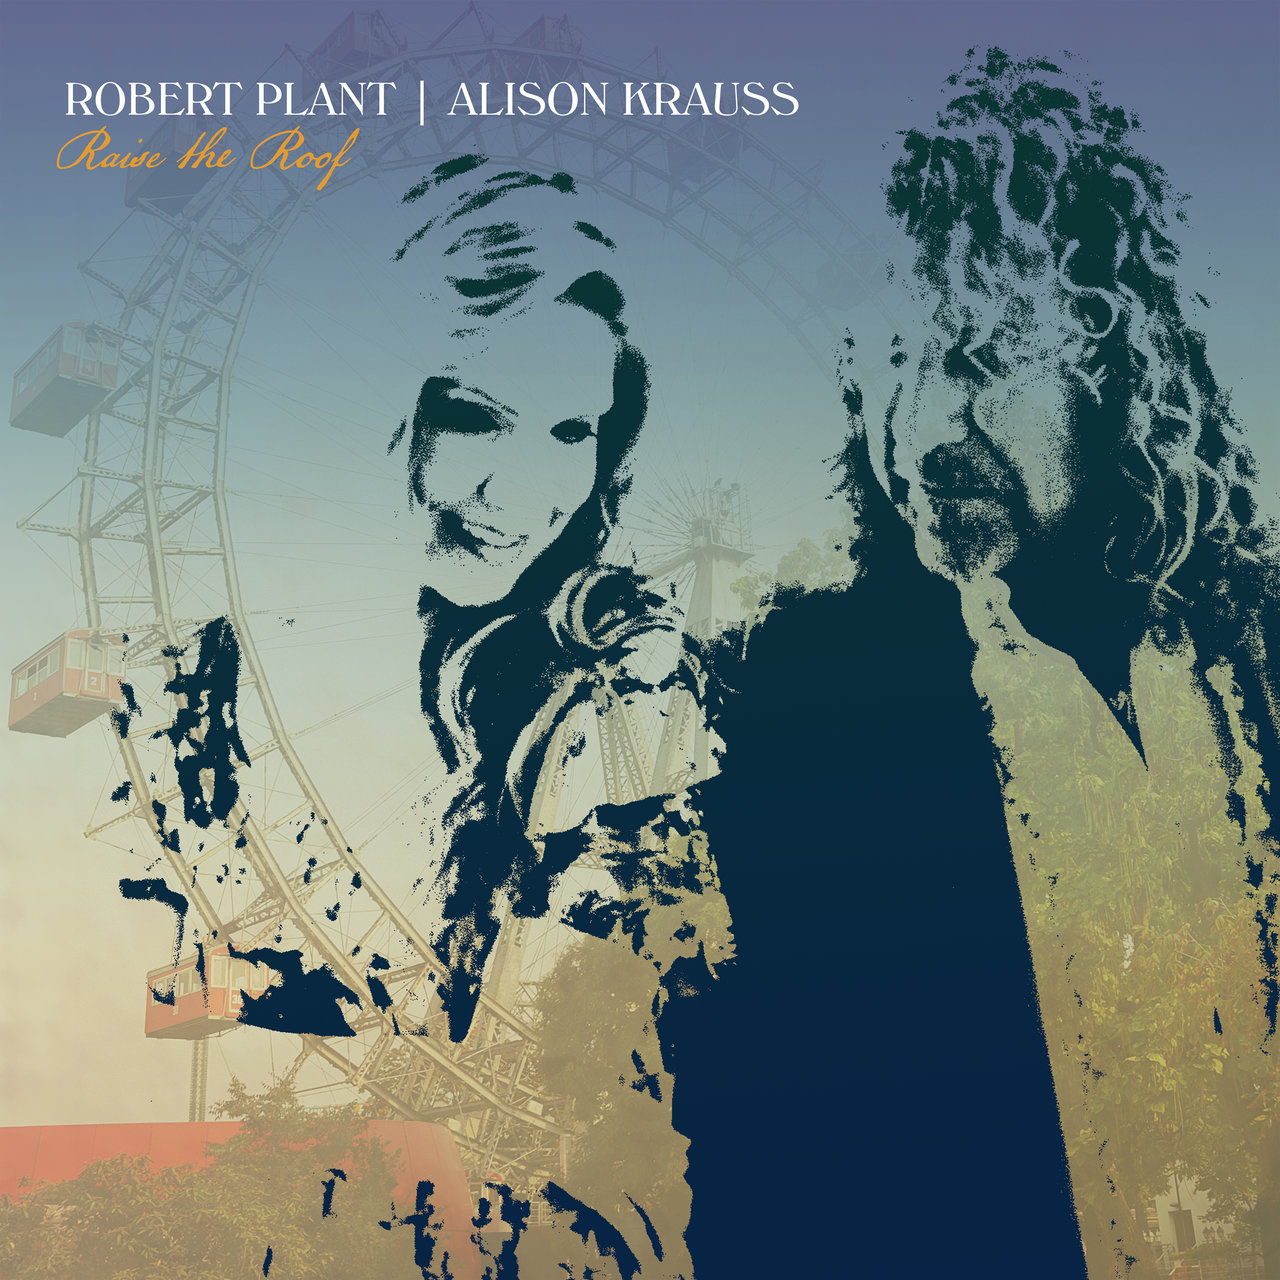 Alison Krauss & Robert Plant - Raise The Roof (Deluxe Edition) (2021/FLAC+MP3)